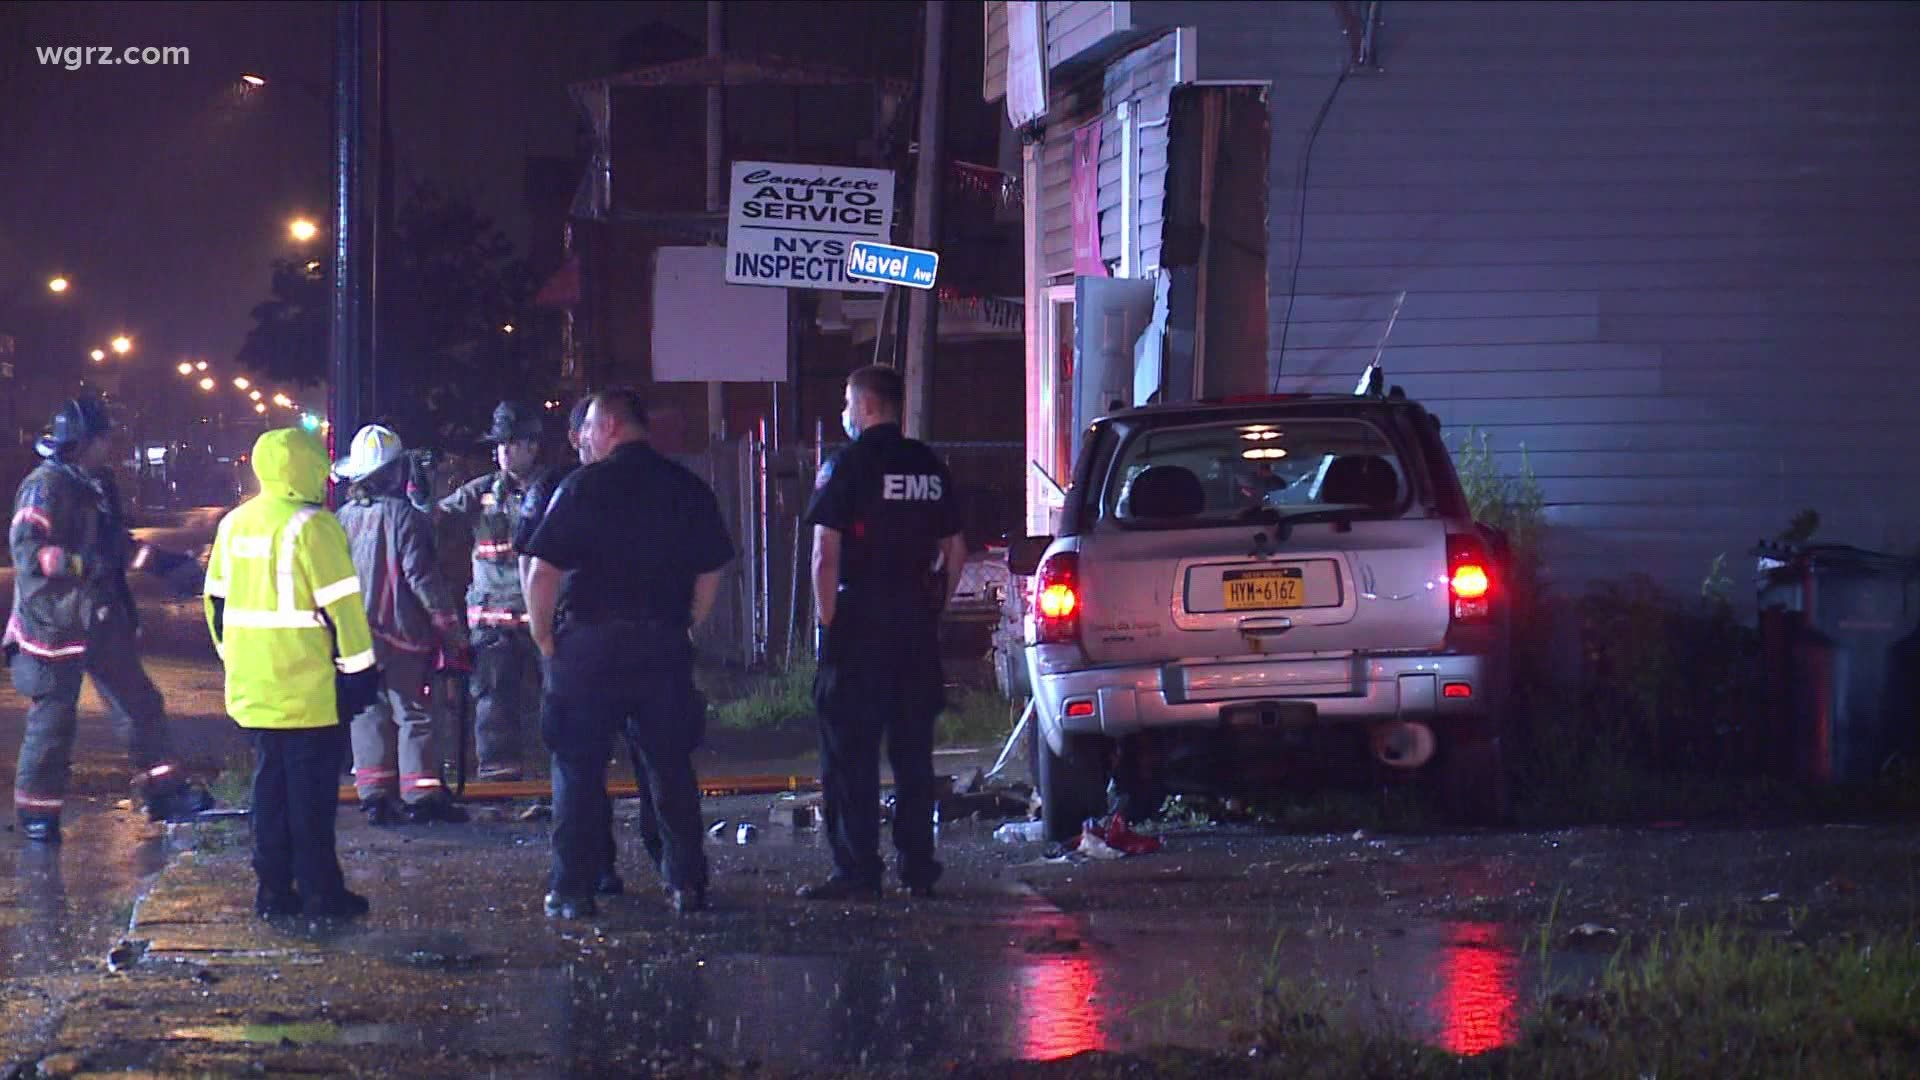 Another car crashed into the side of a building on Bailey Avenue last night according to Buffalo police.